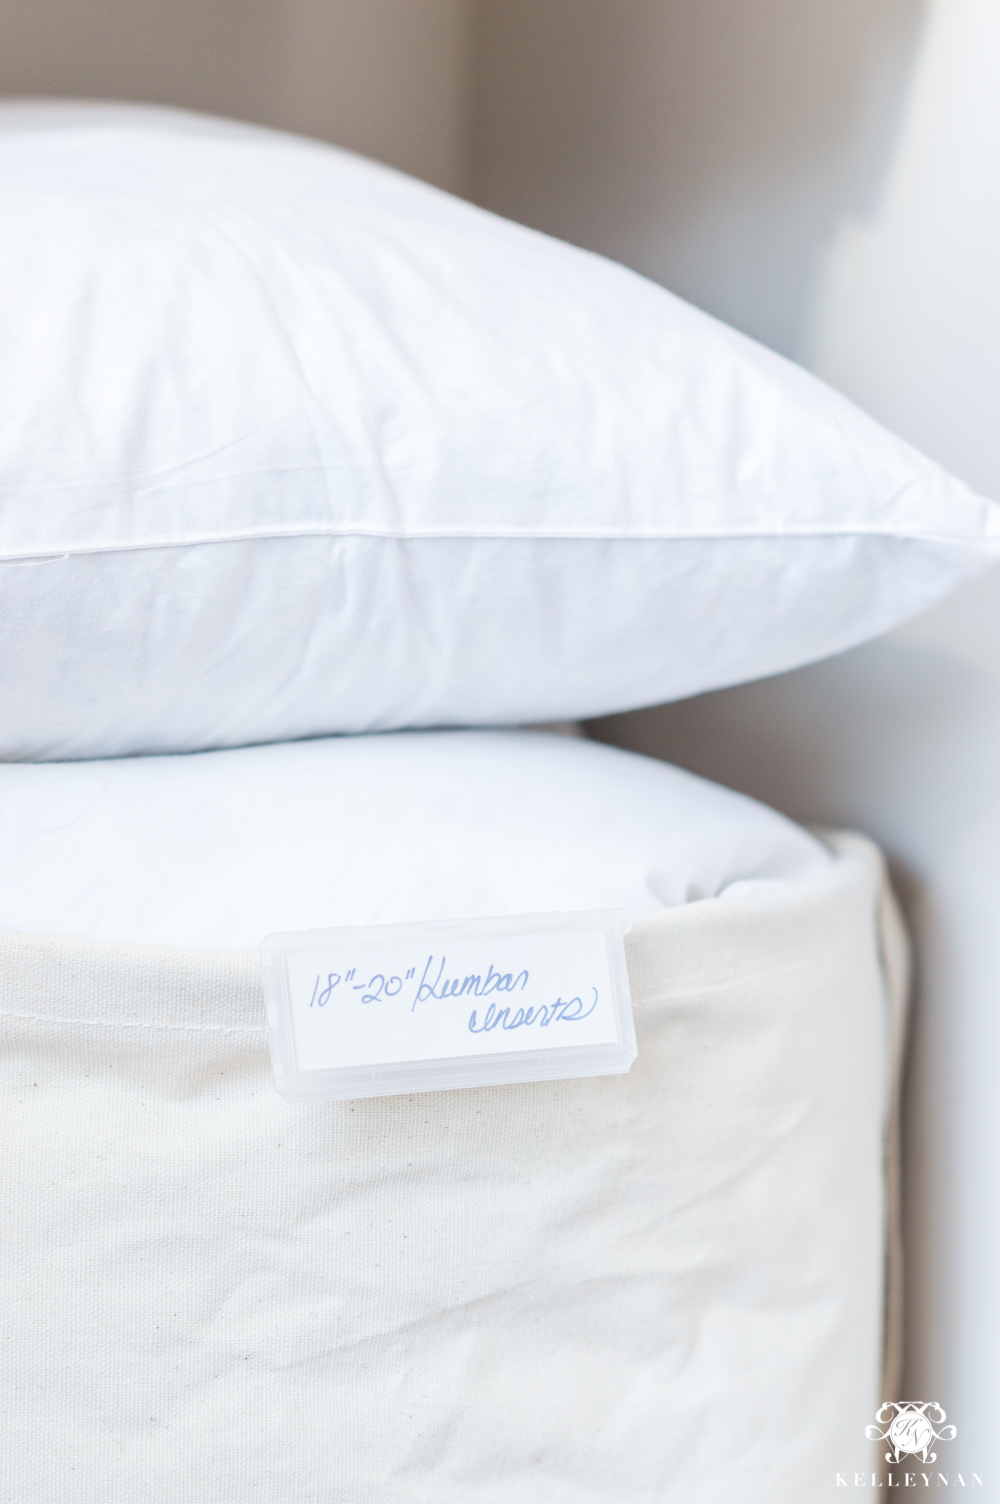 Organizing pillow inserts by size with labels